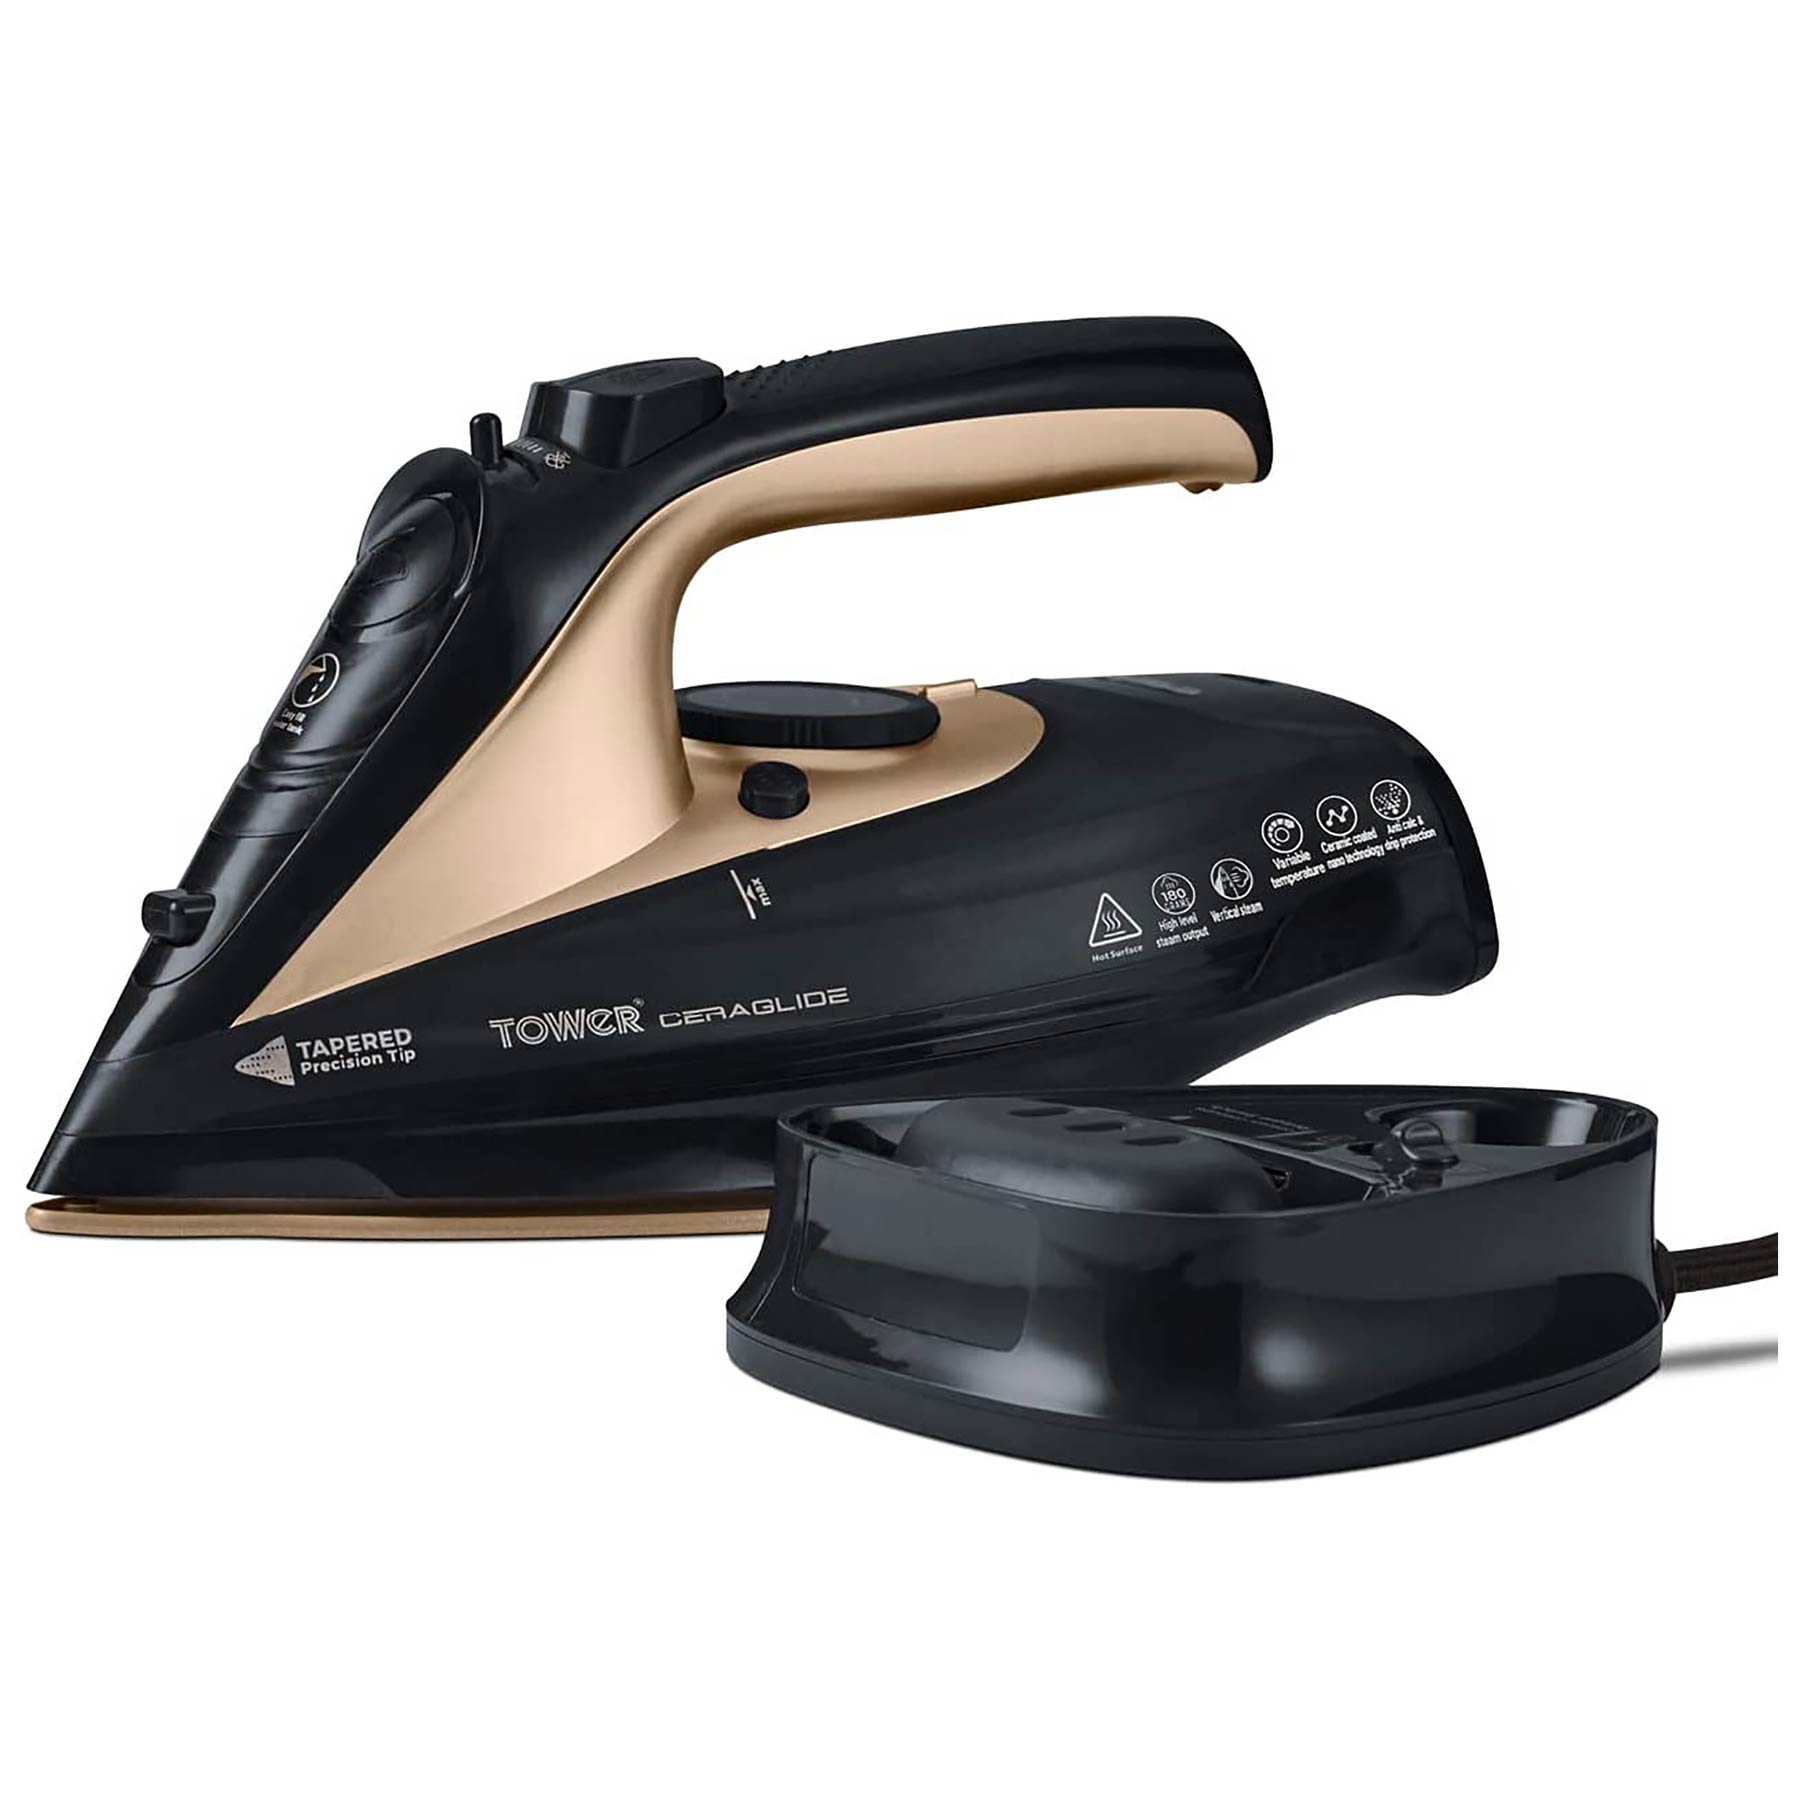 Image of Tower T22008BKG 2 in 1 Cord Cordless Steam Iron in Black and Gold